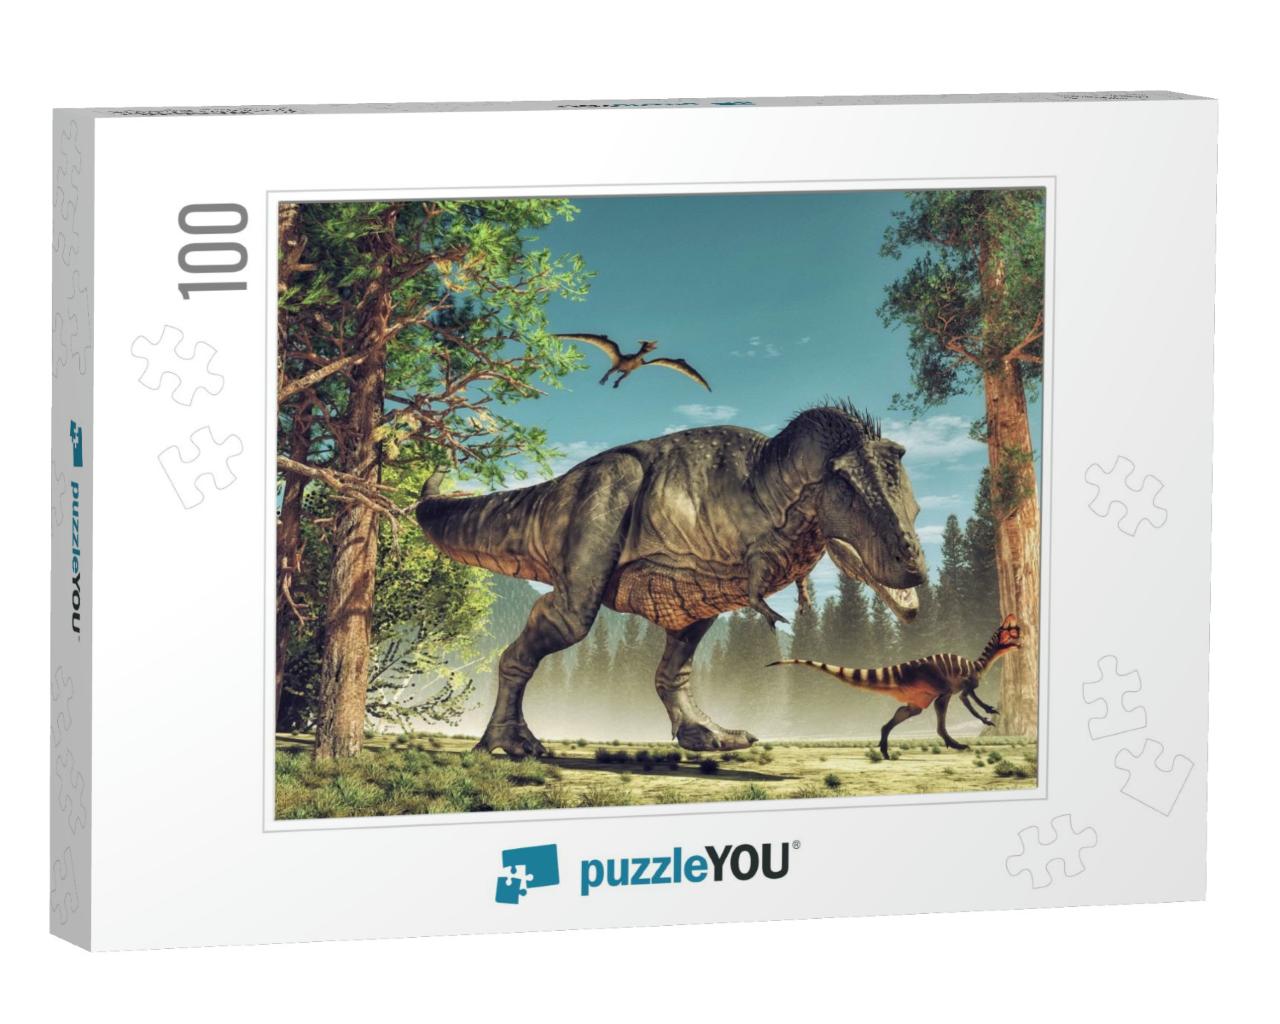 3D Render Dinosaur. This is a 3D Render Illustration... Jigsaw Puzzle with 100 pieces